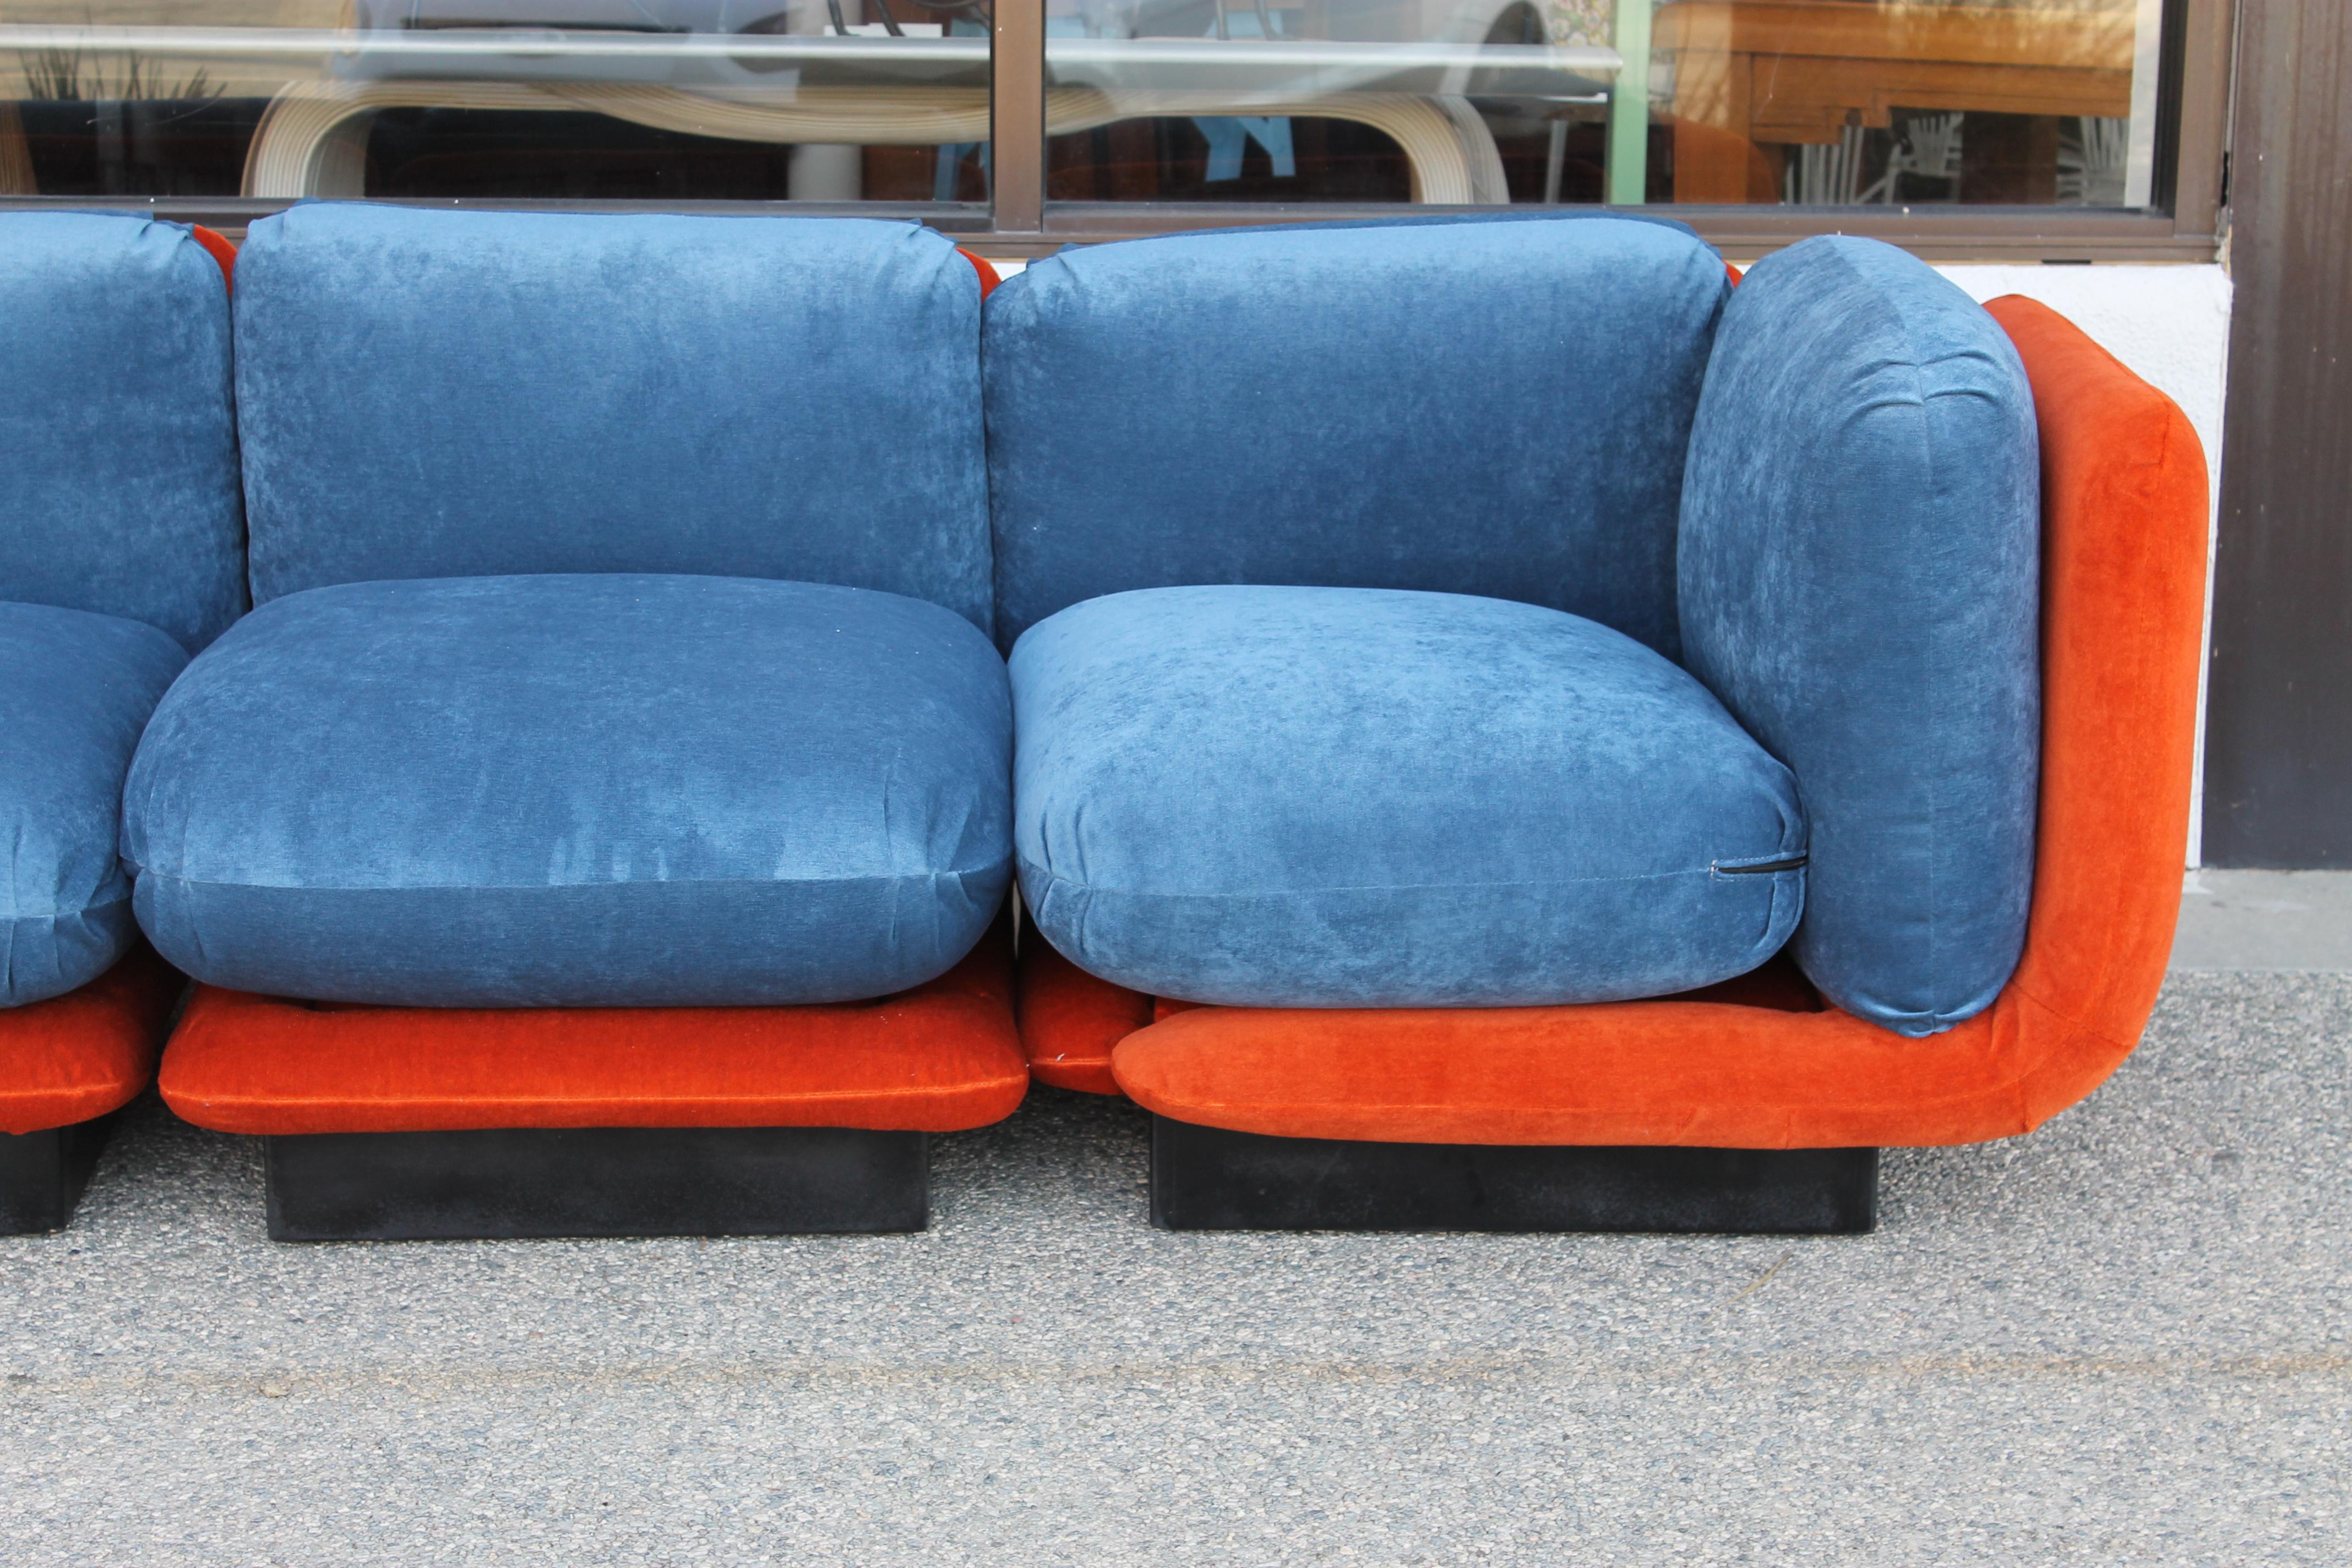 Sectional sofa consisting of 4 interchangeable pieces on wood bases. We had it upholstered in an identical orange and blue mohair fabric. Labels date it from 1980 and made at Hayes Furniture Manufacturers, Oakland, California. Sofa measures 120